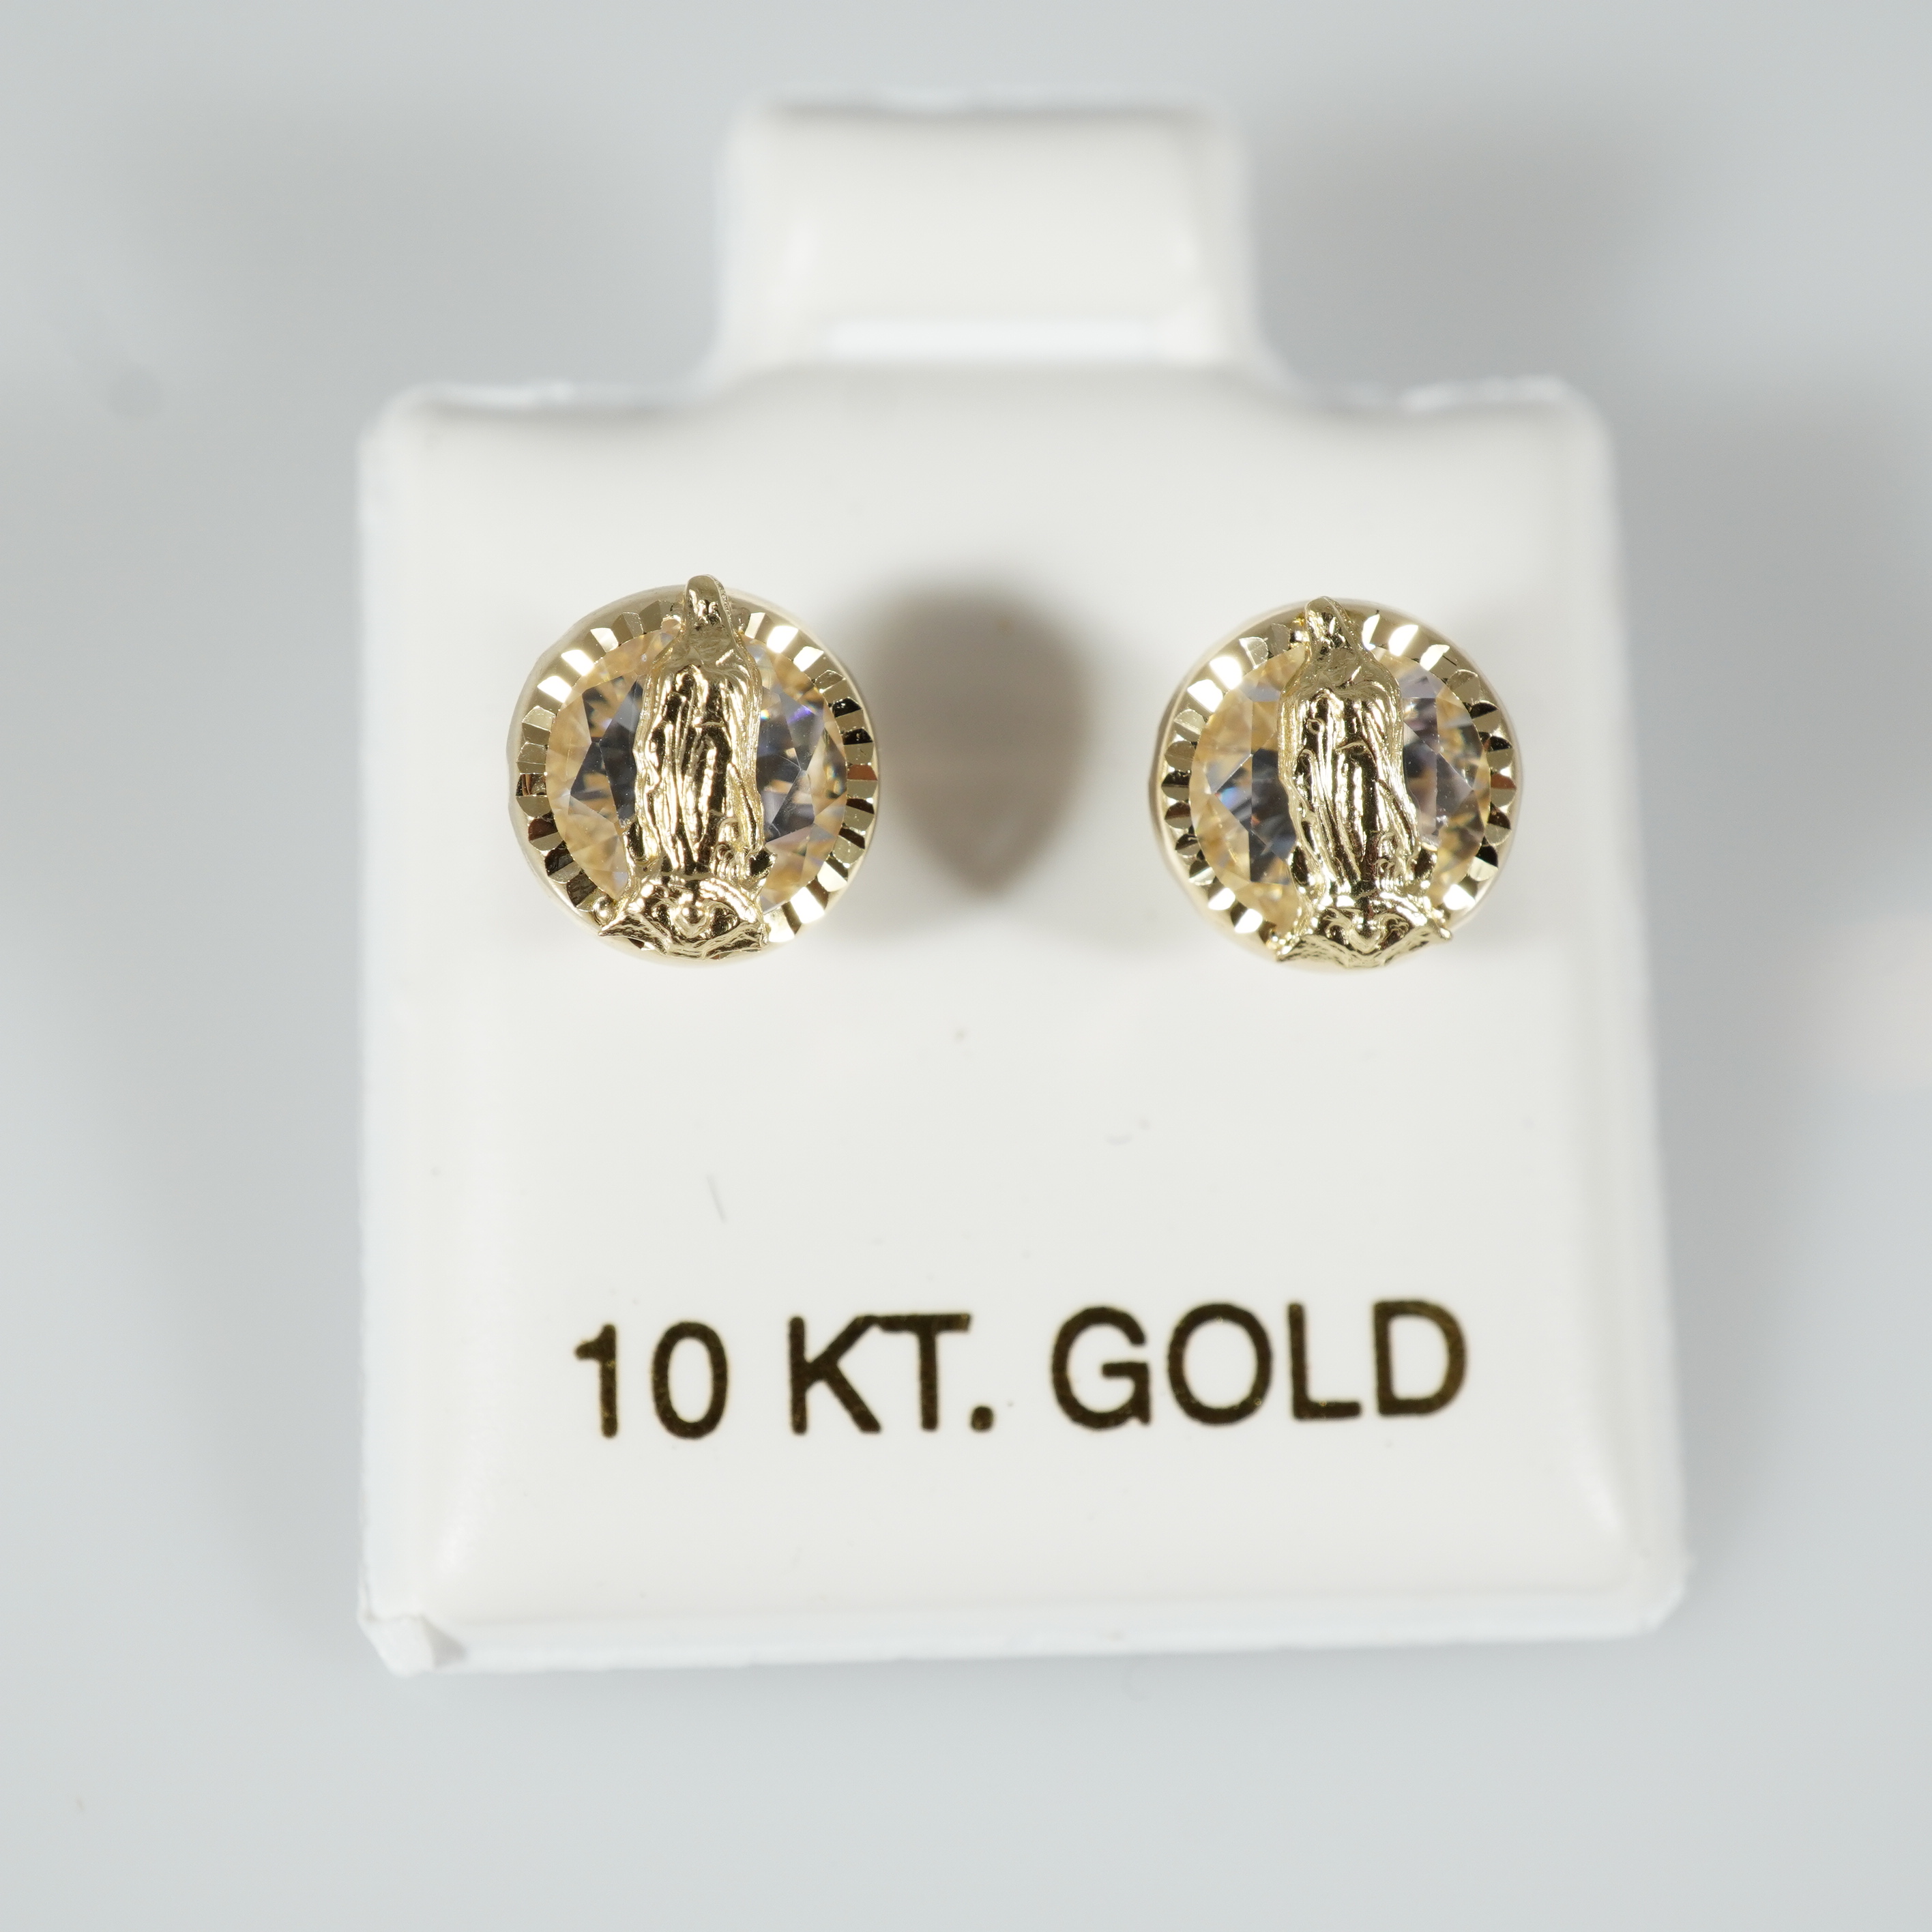 10k Solid Gold Virgin Mary Over Cubic Zirconia Stud Earrings, Screw Back